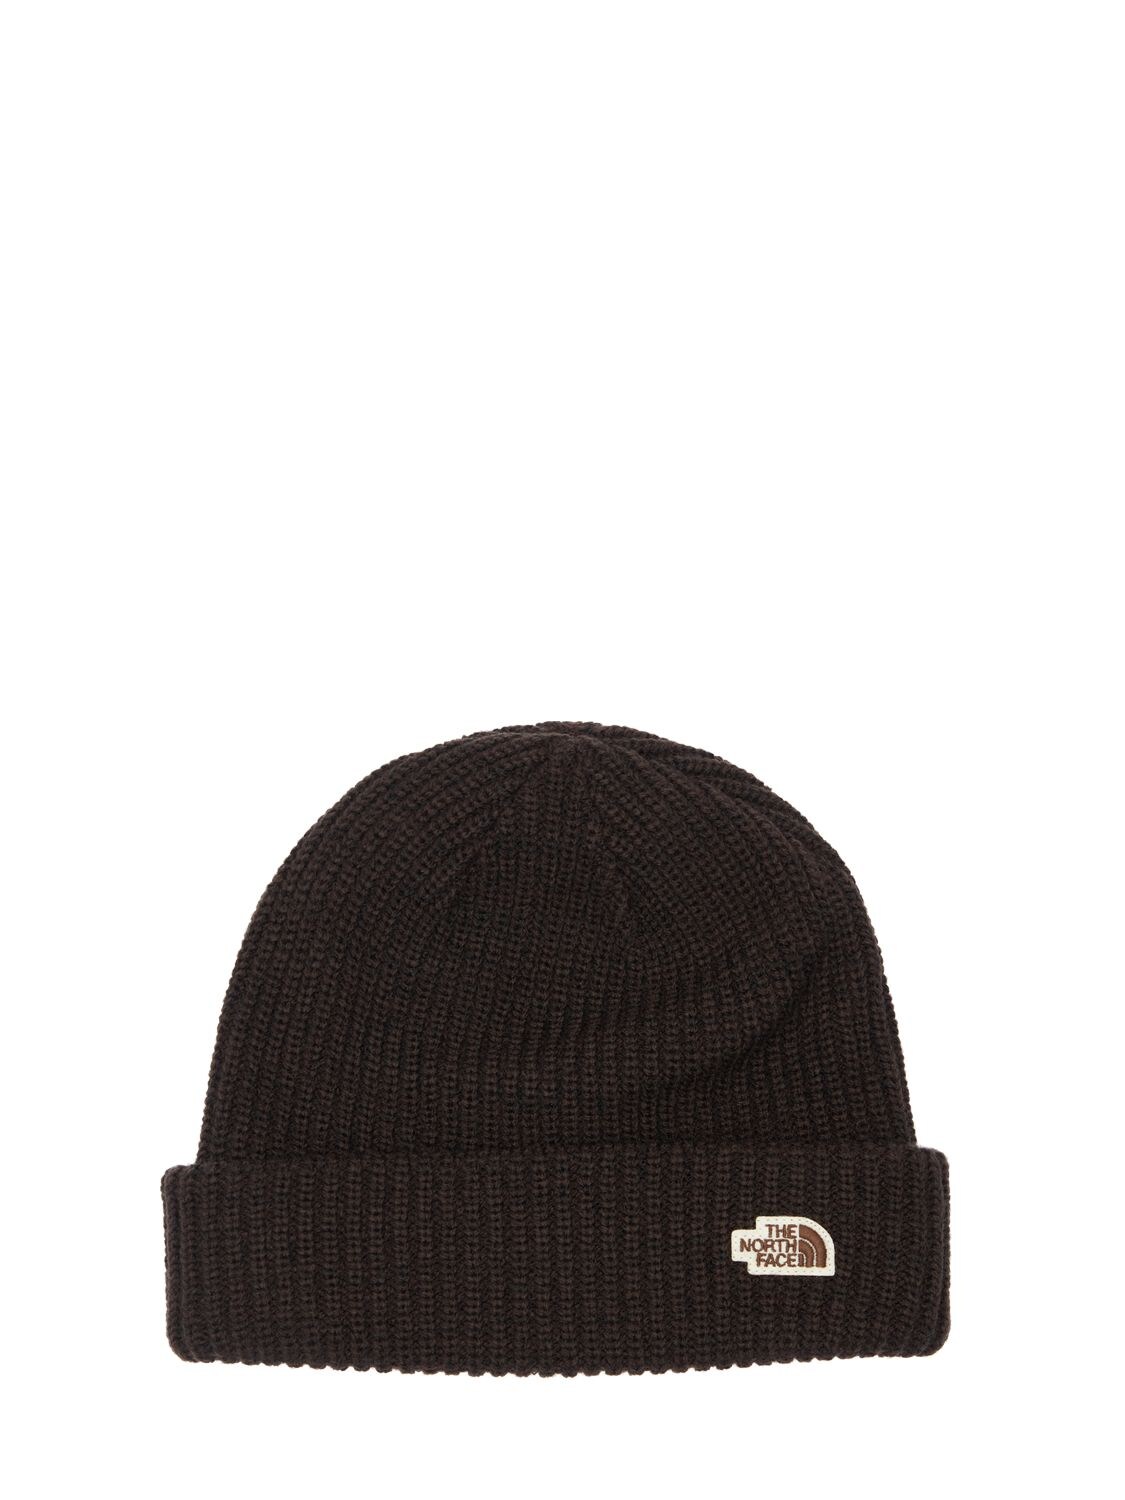 THE NORTH FACE SALTY DOG BEANIE HAT